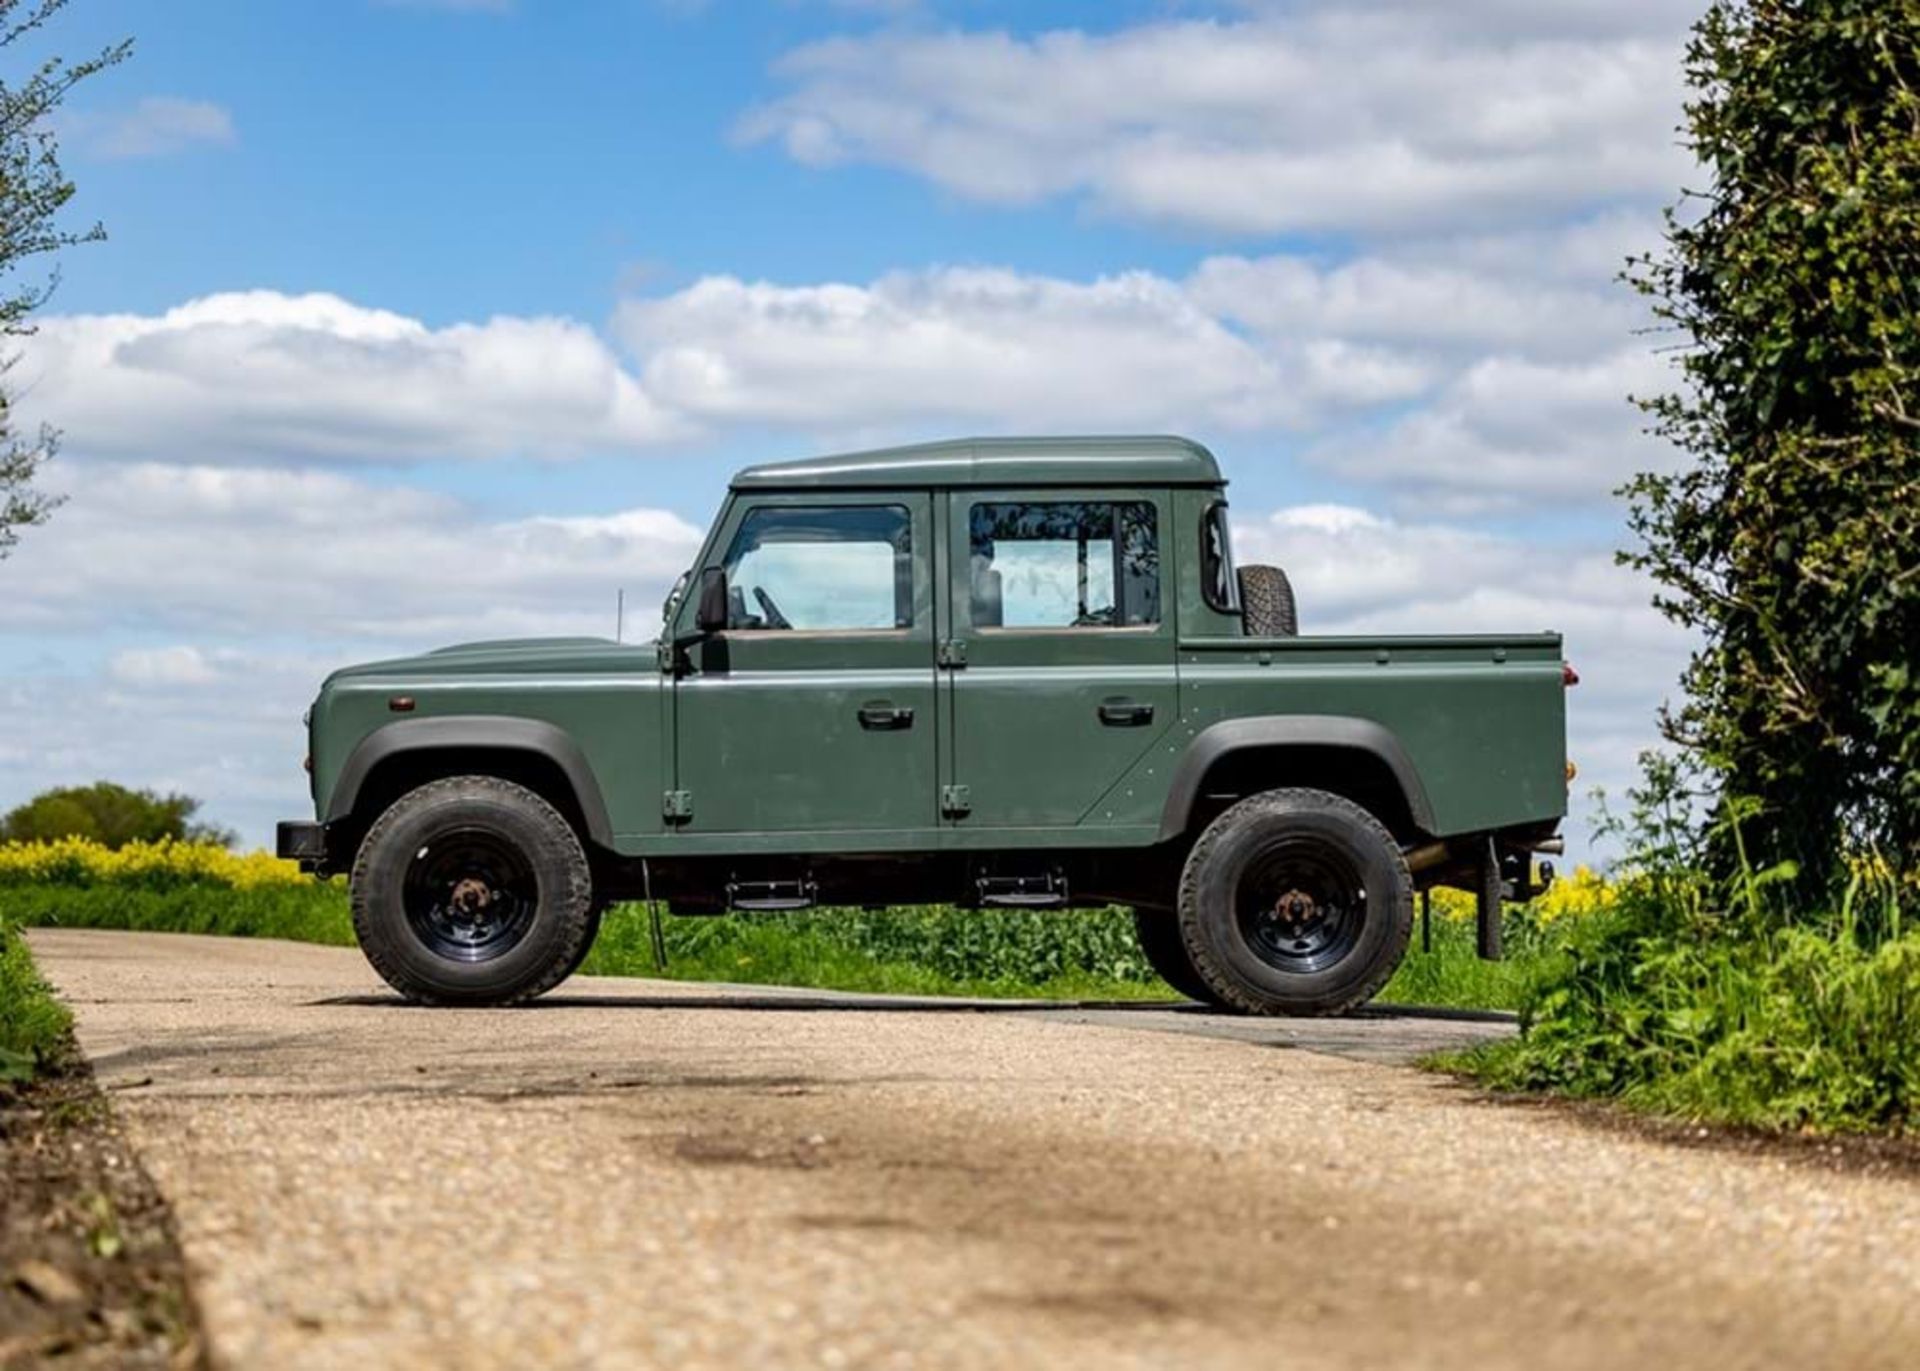 2012 Land Rover Defender Double Cab Pick-up - Image 10 of 10